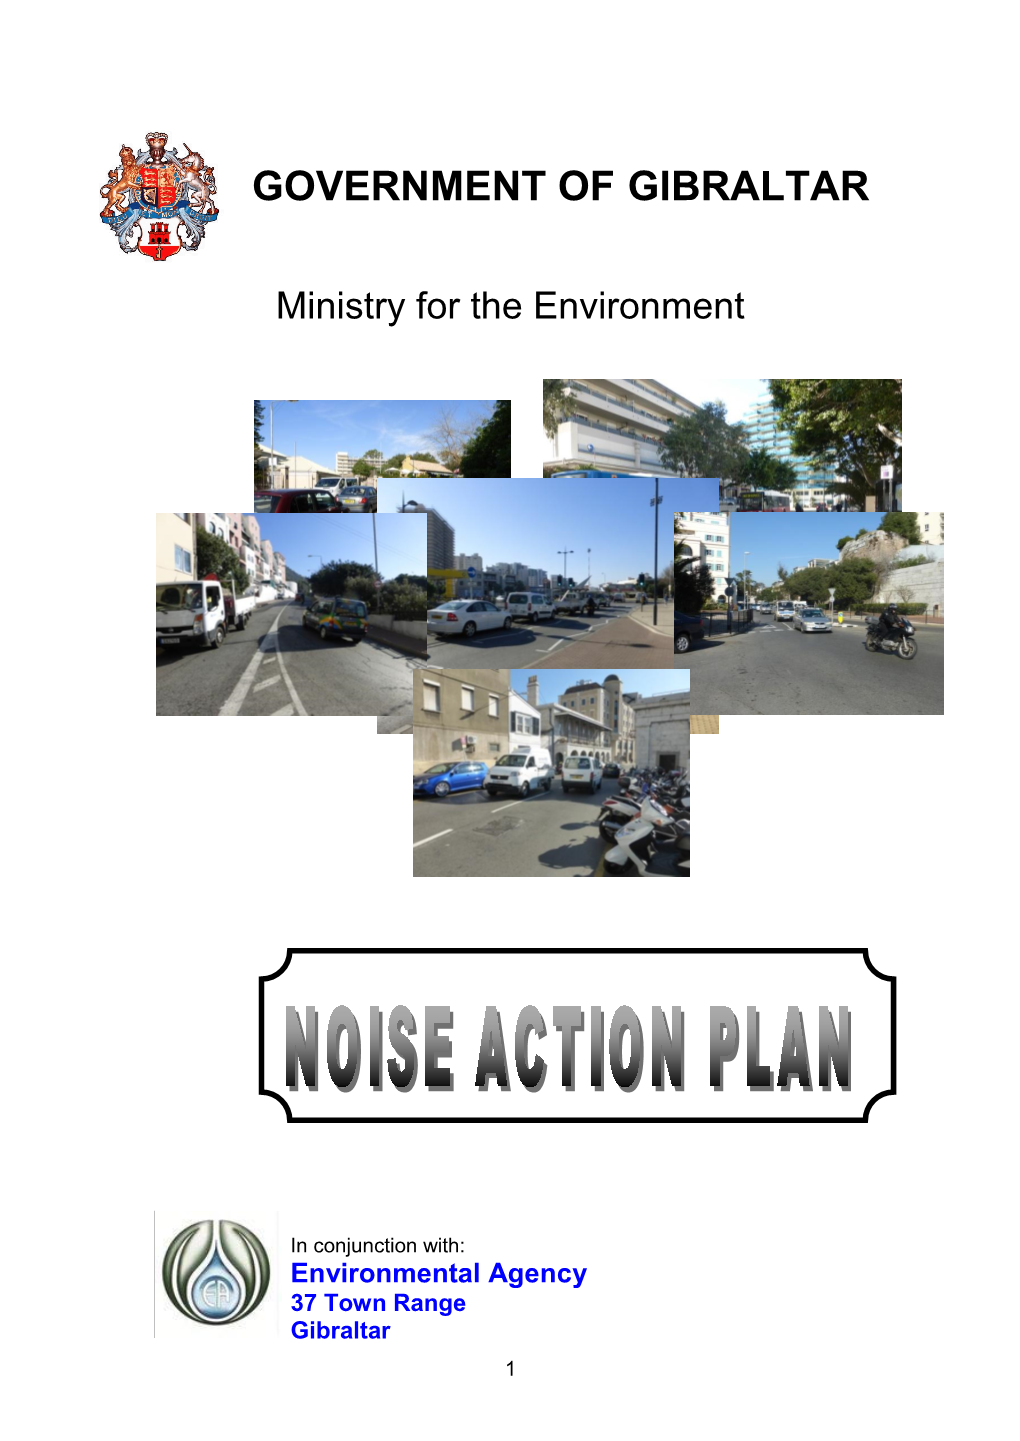 Noise Action Plan Follows on from the First Environmental Noise Action Plan for Gibraltar’S Major Roads (Ref: GI Mroad, January 2009)